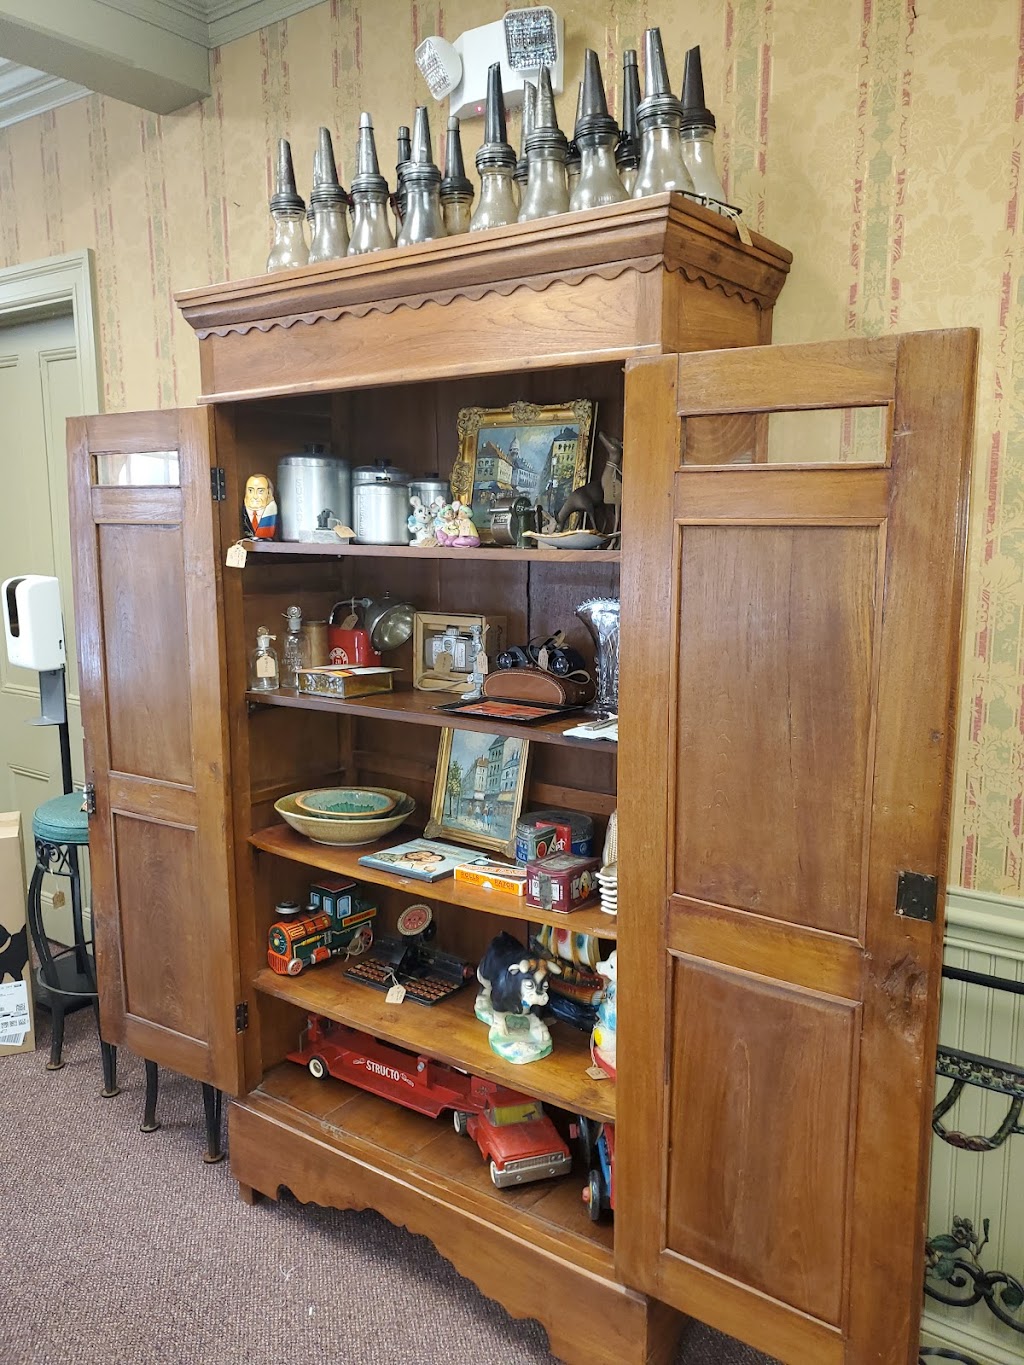 Sentiment Depot Antiques and Collectibles | 238 W Delaware Ave, Pennington, NJ 08534 | Phone: (609) 669-1566